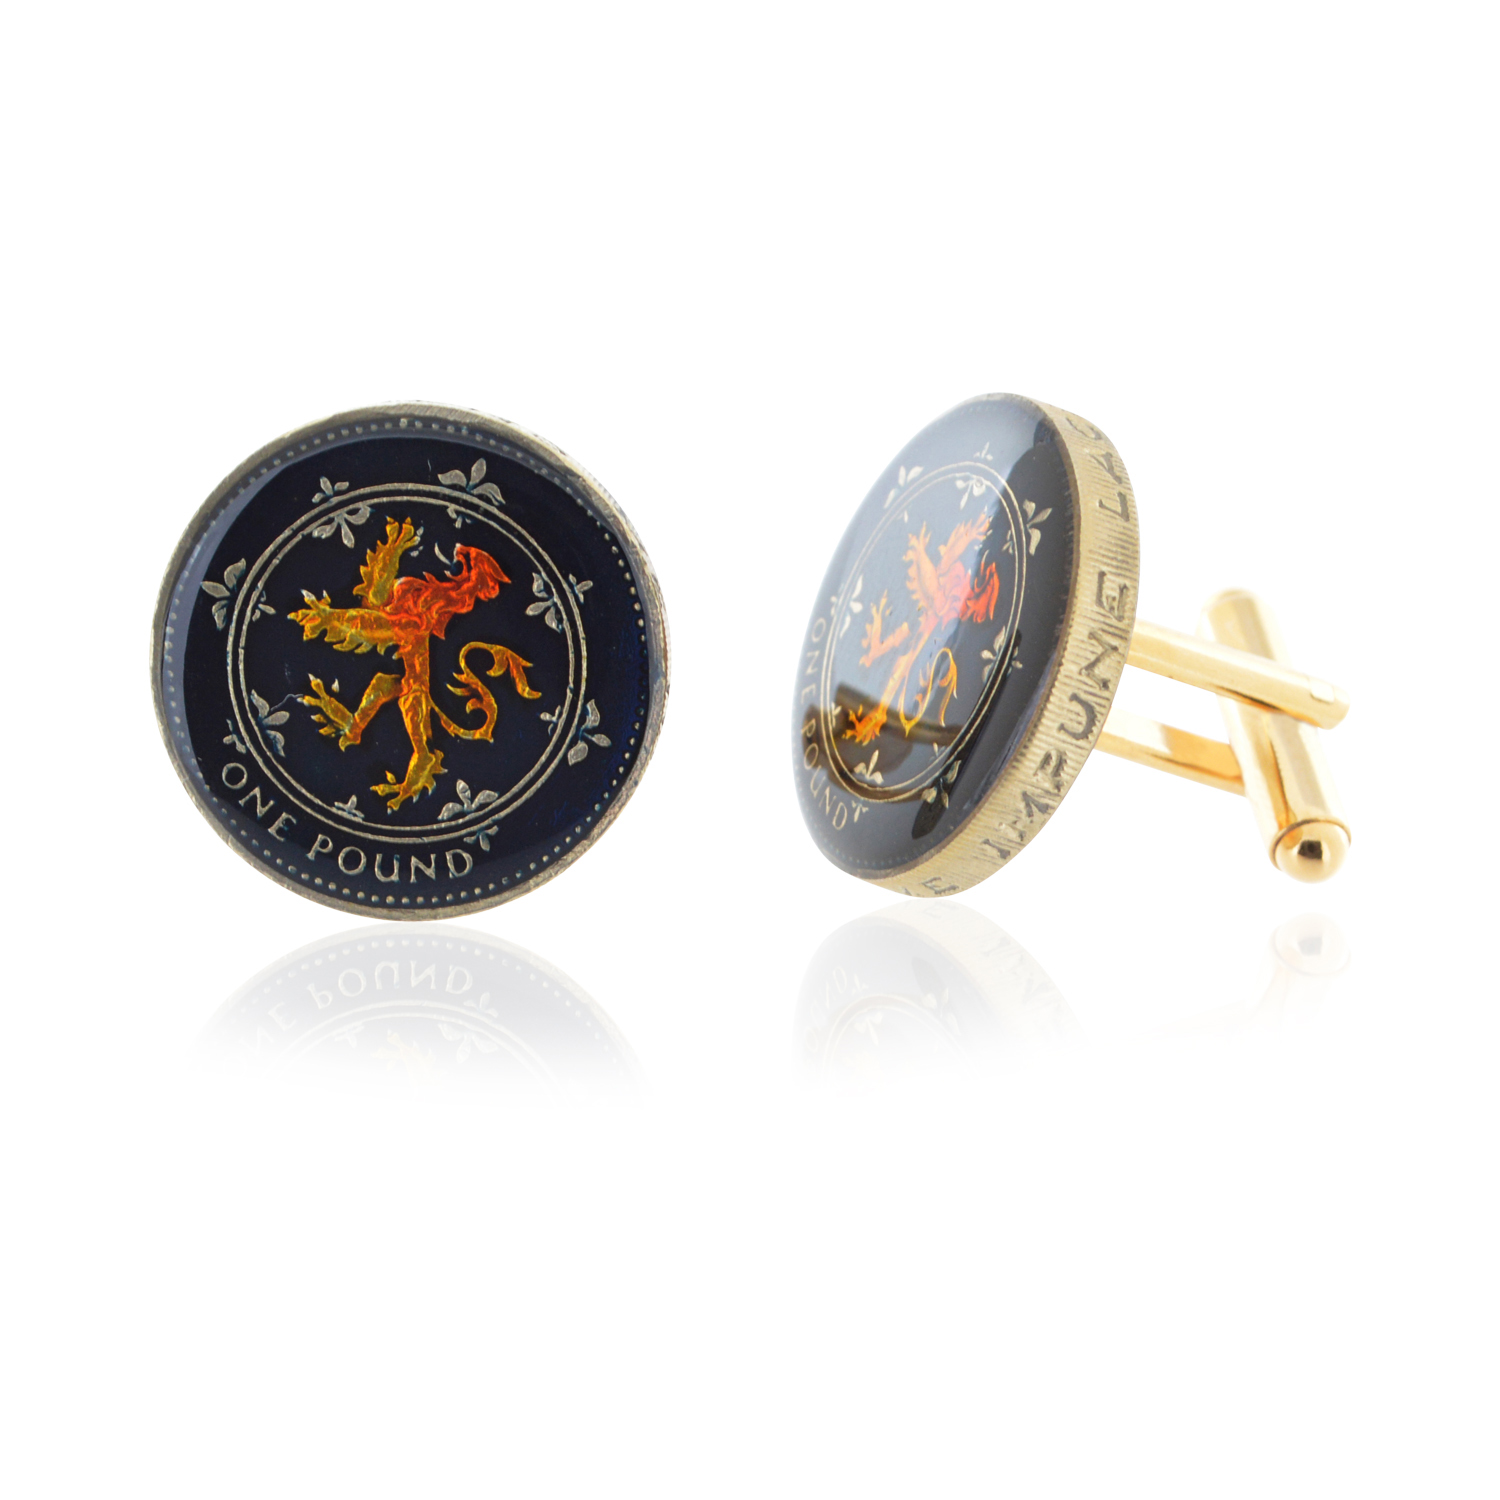 Cufflinks hand painted enamel coin Cuff links France